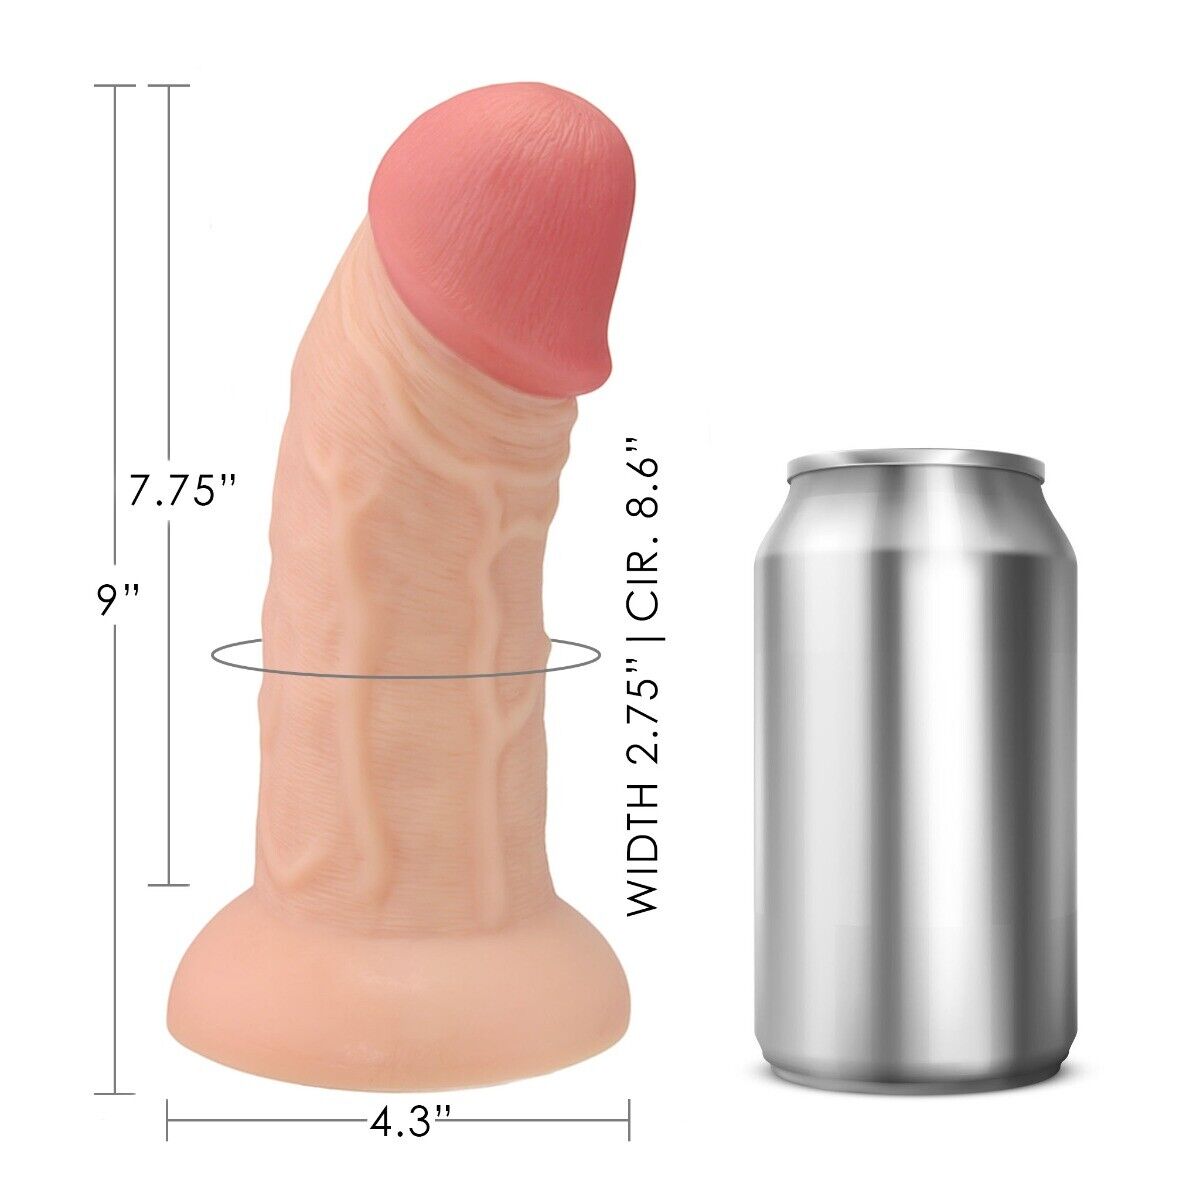 XXL 9" Huge Thick Realistic Anal G-spot Dildo Dong Cock Suction Cup Base